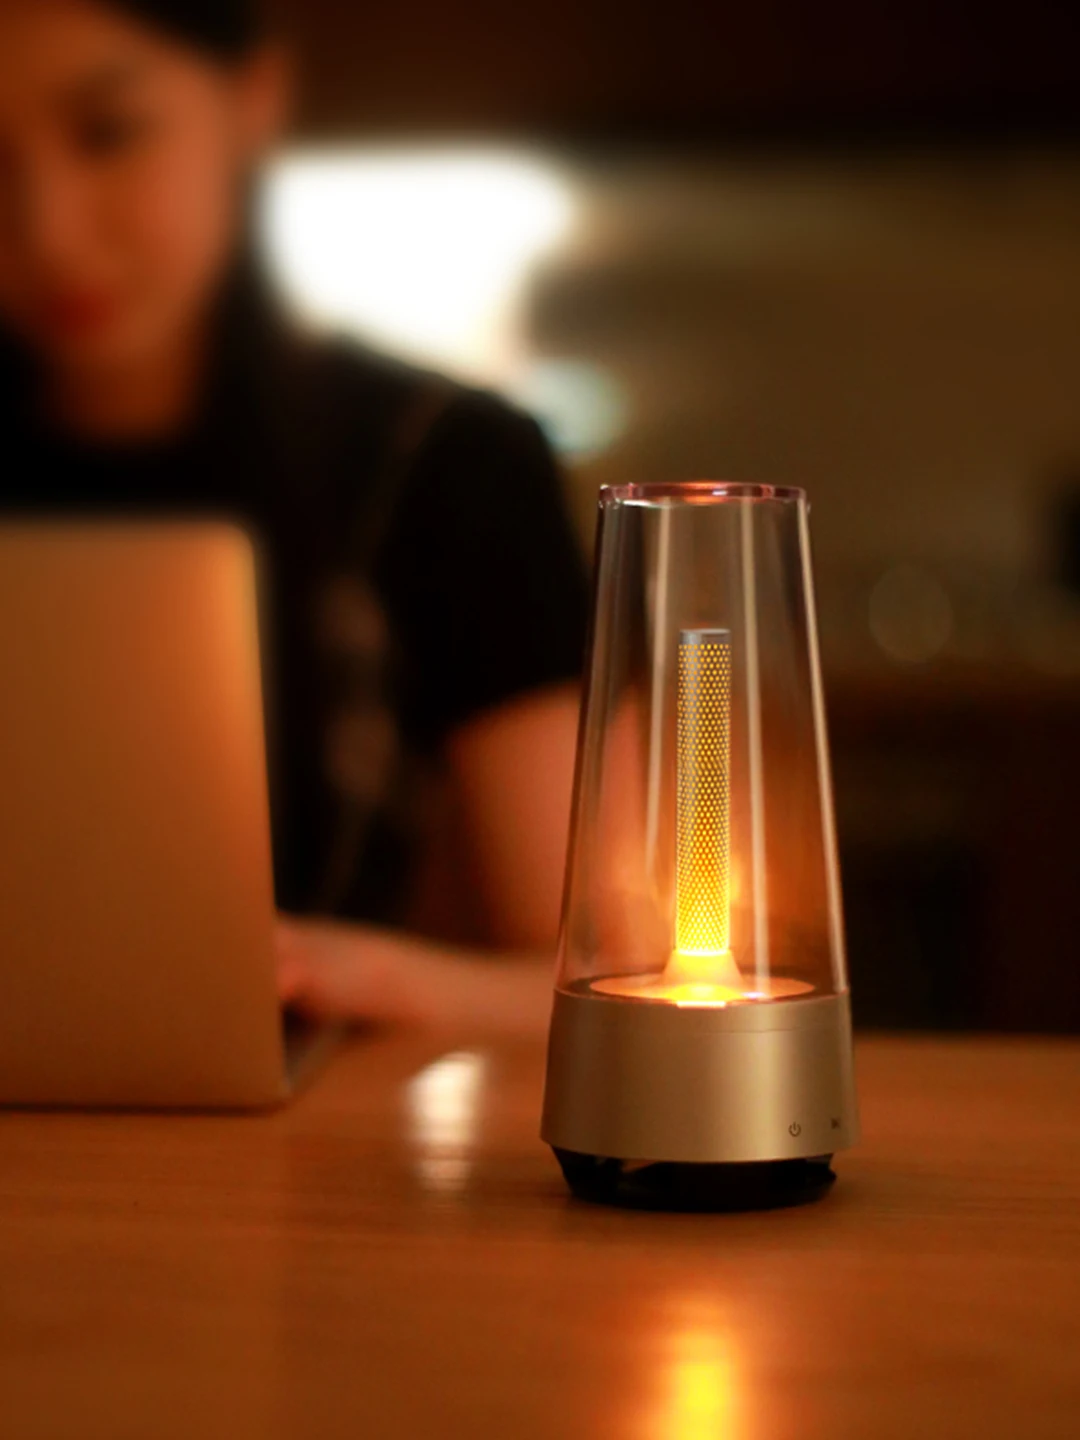 LED Romantic Candlelight, Flame, Small Night Light, Bluetooth Speaker, Bedside Lamp, Sound, Camping Atmosphere, Table Lamp